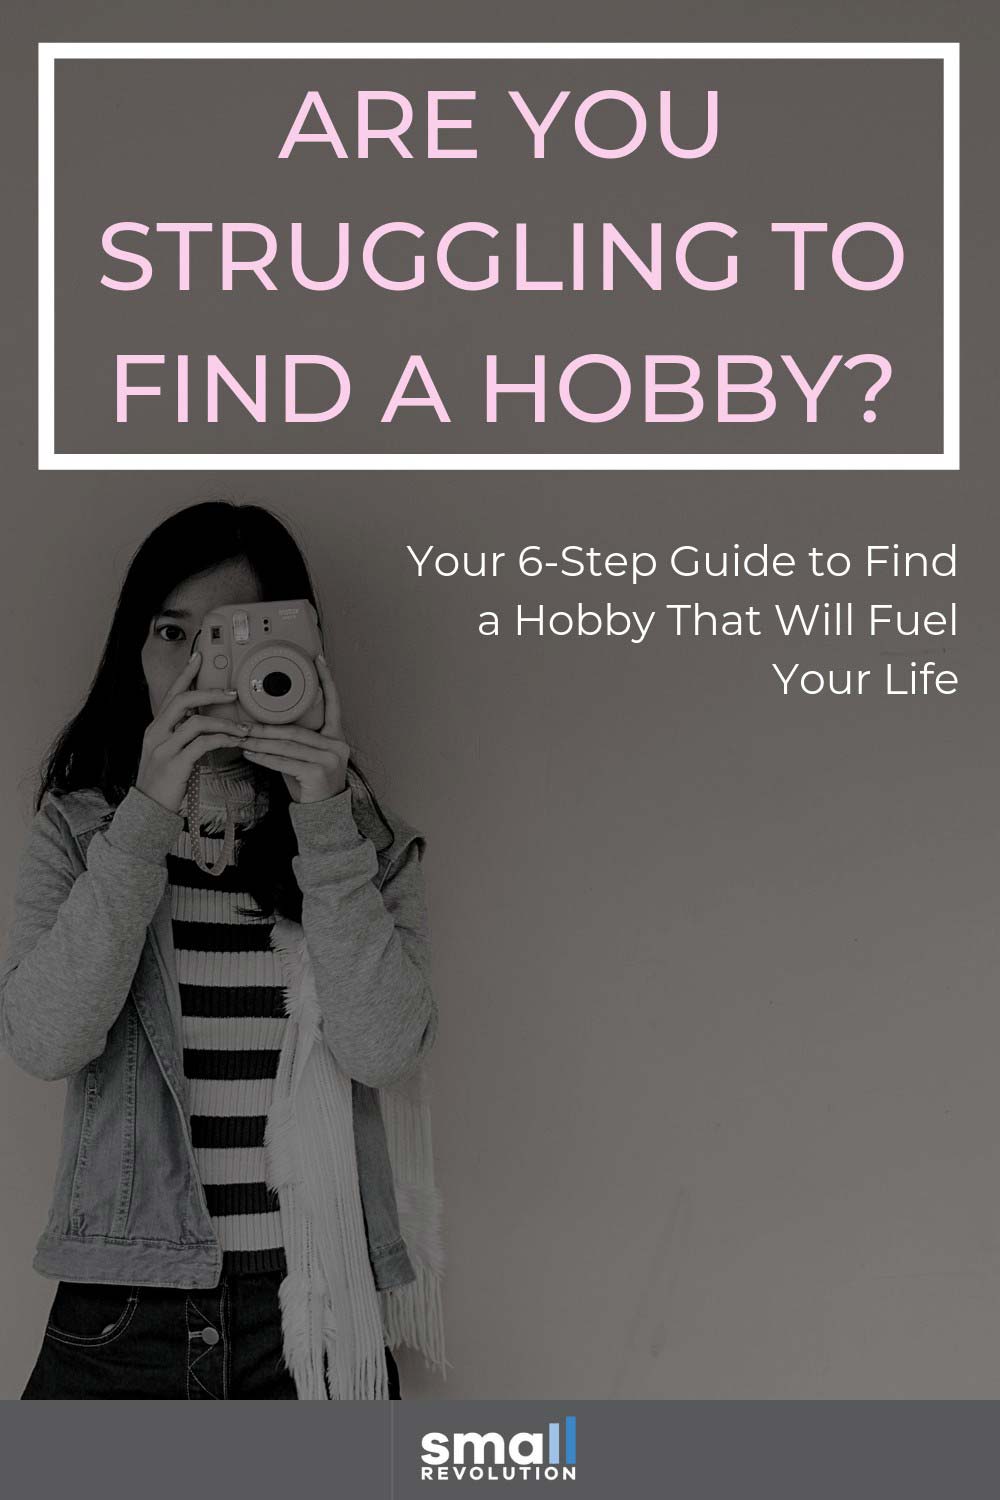 Are you struggling to find a hobby?